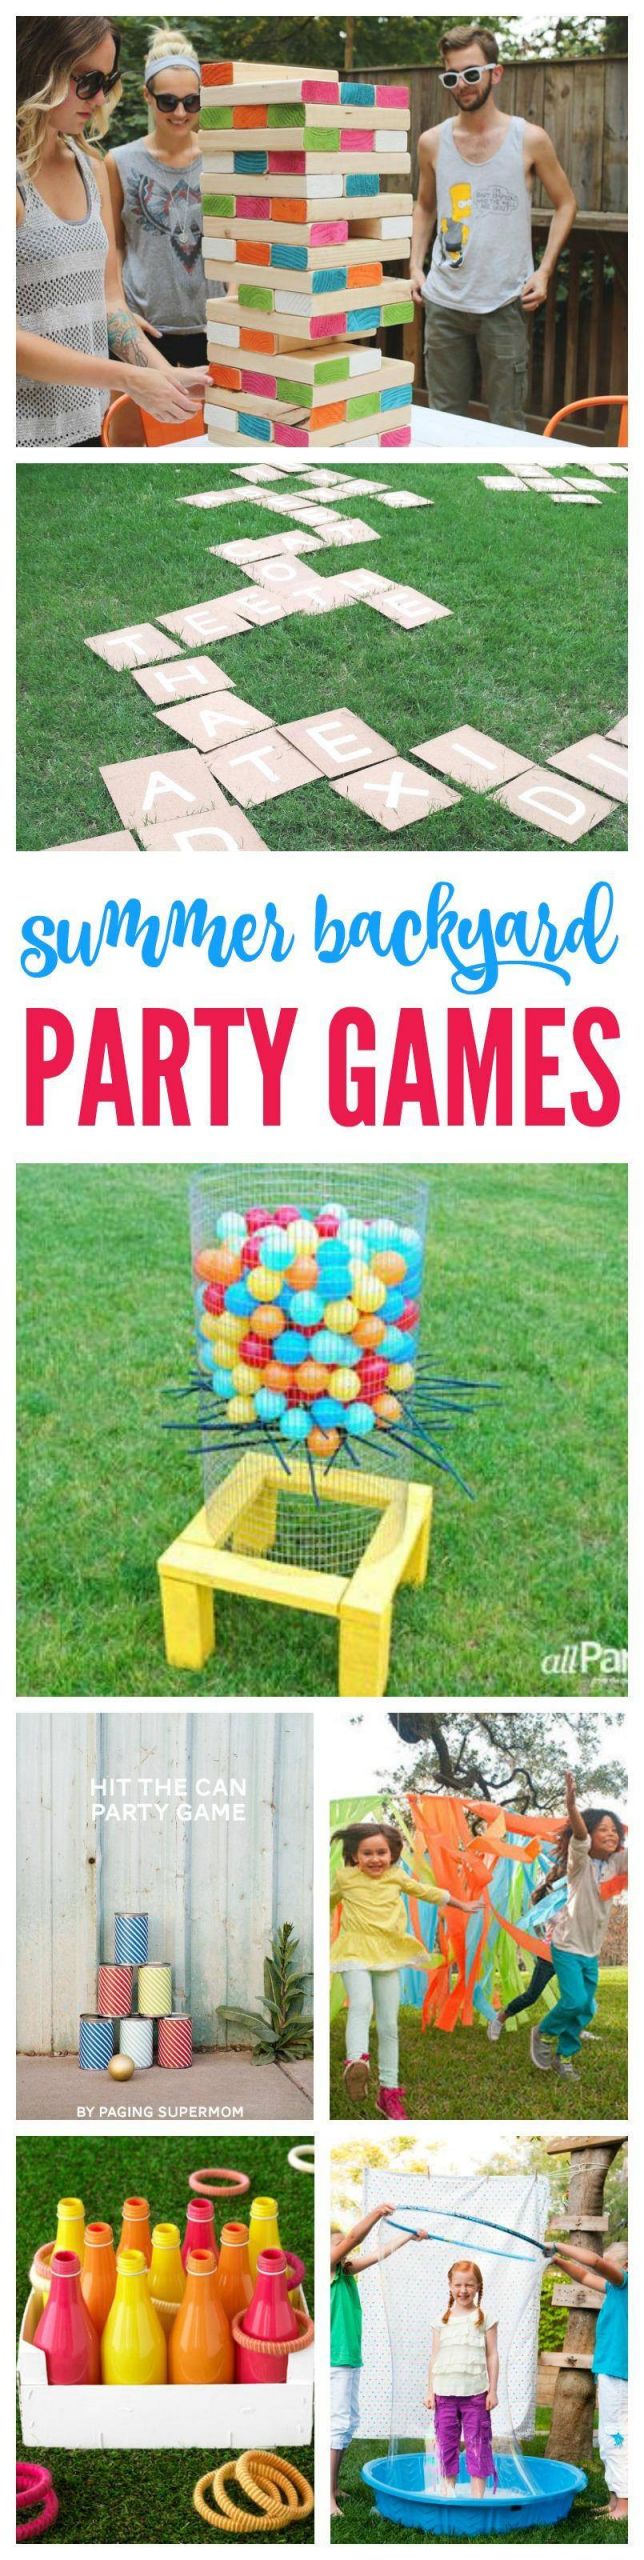 Summer Party Games
 Summer Backyard Party Games